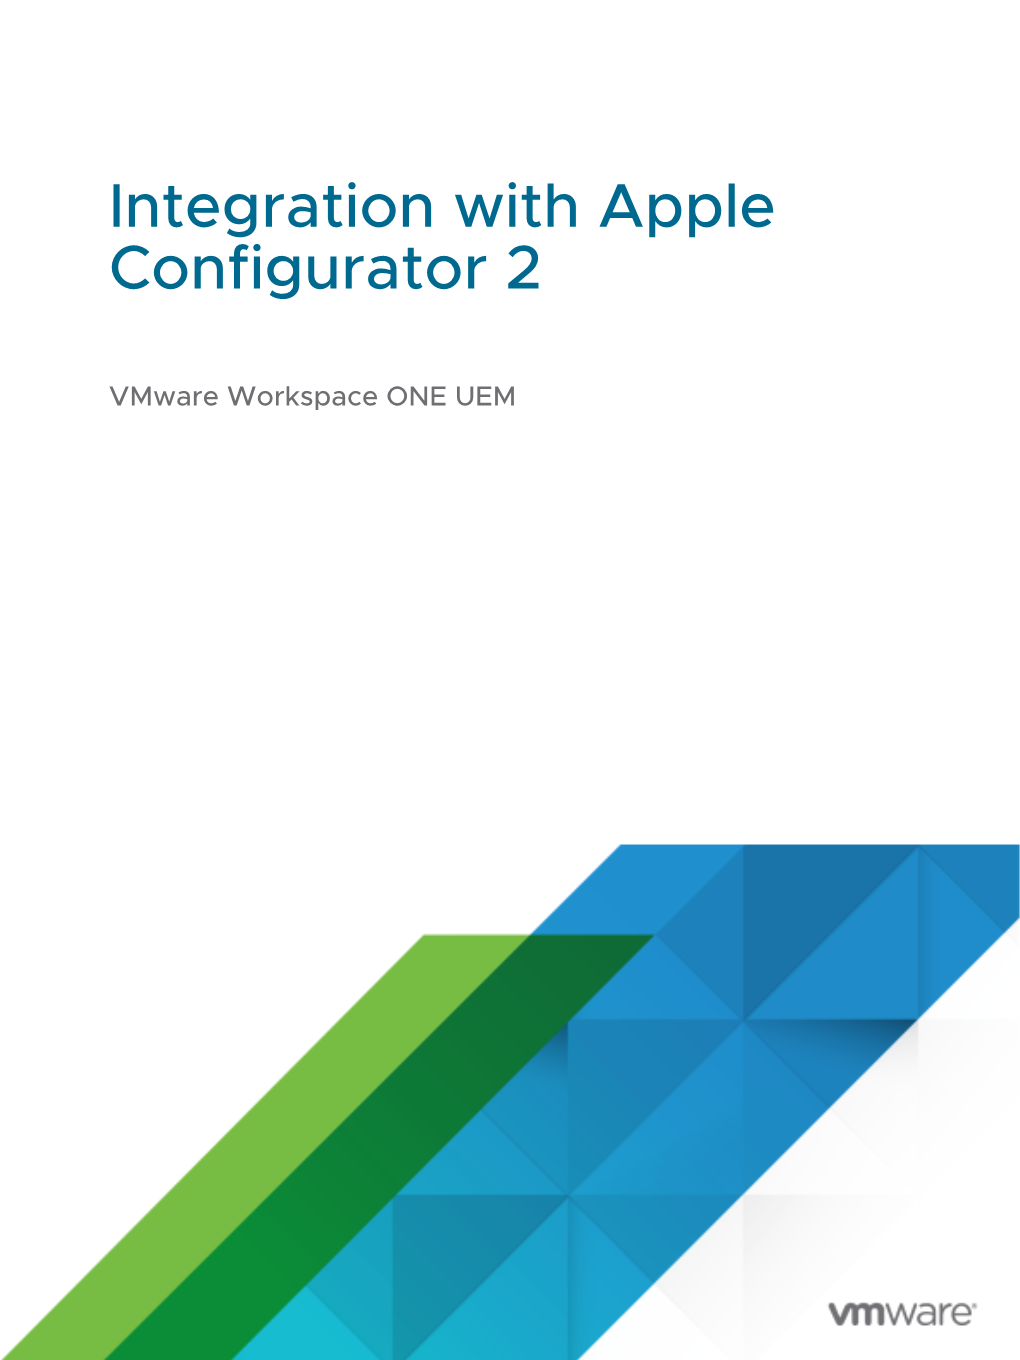 Integration with Apple Configurator 2